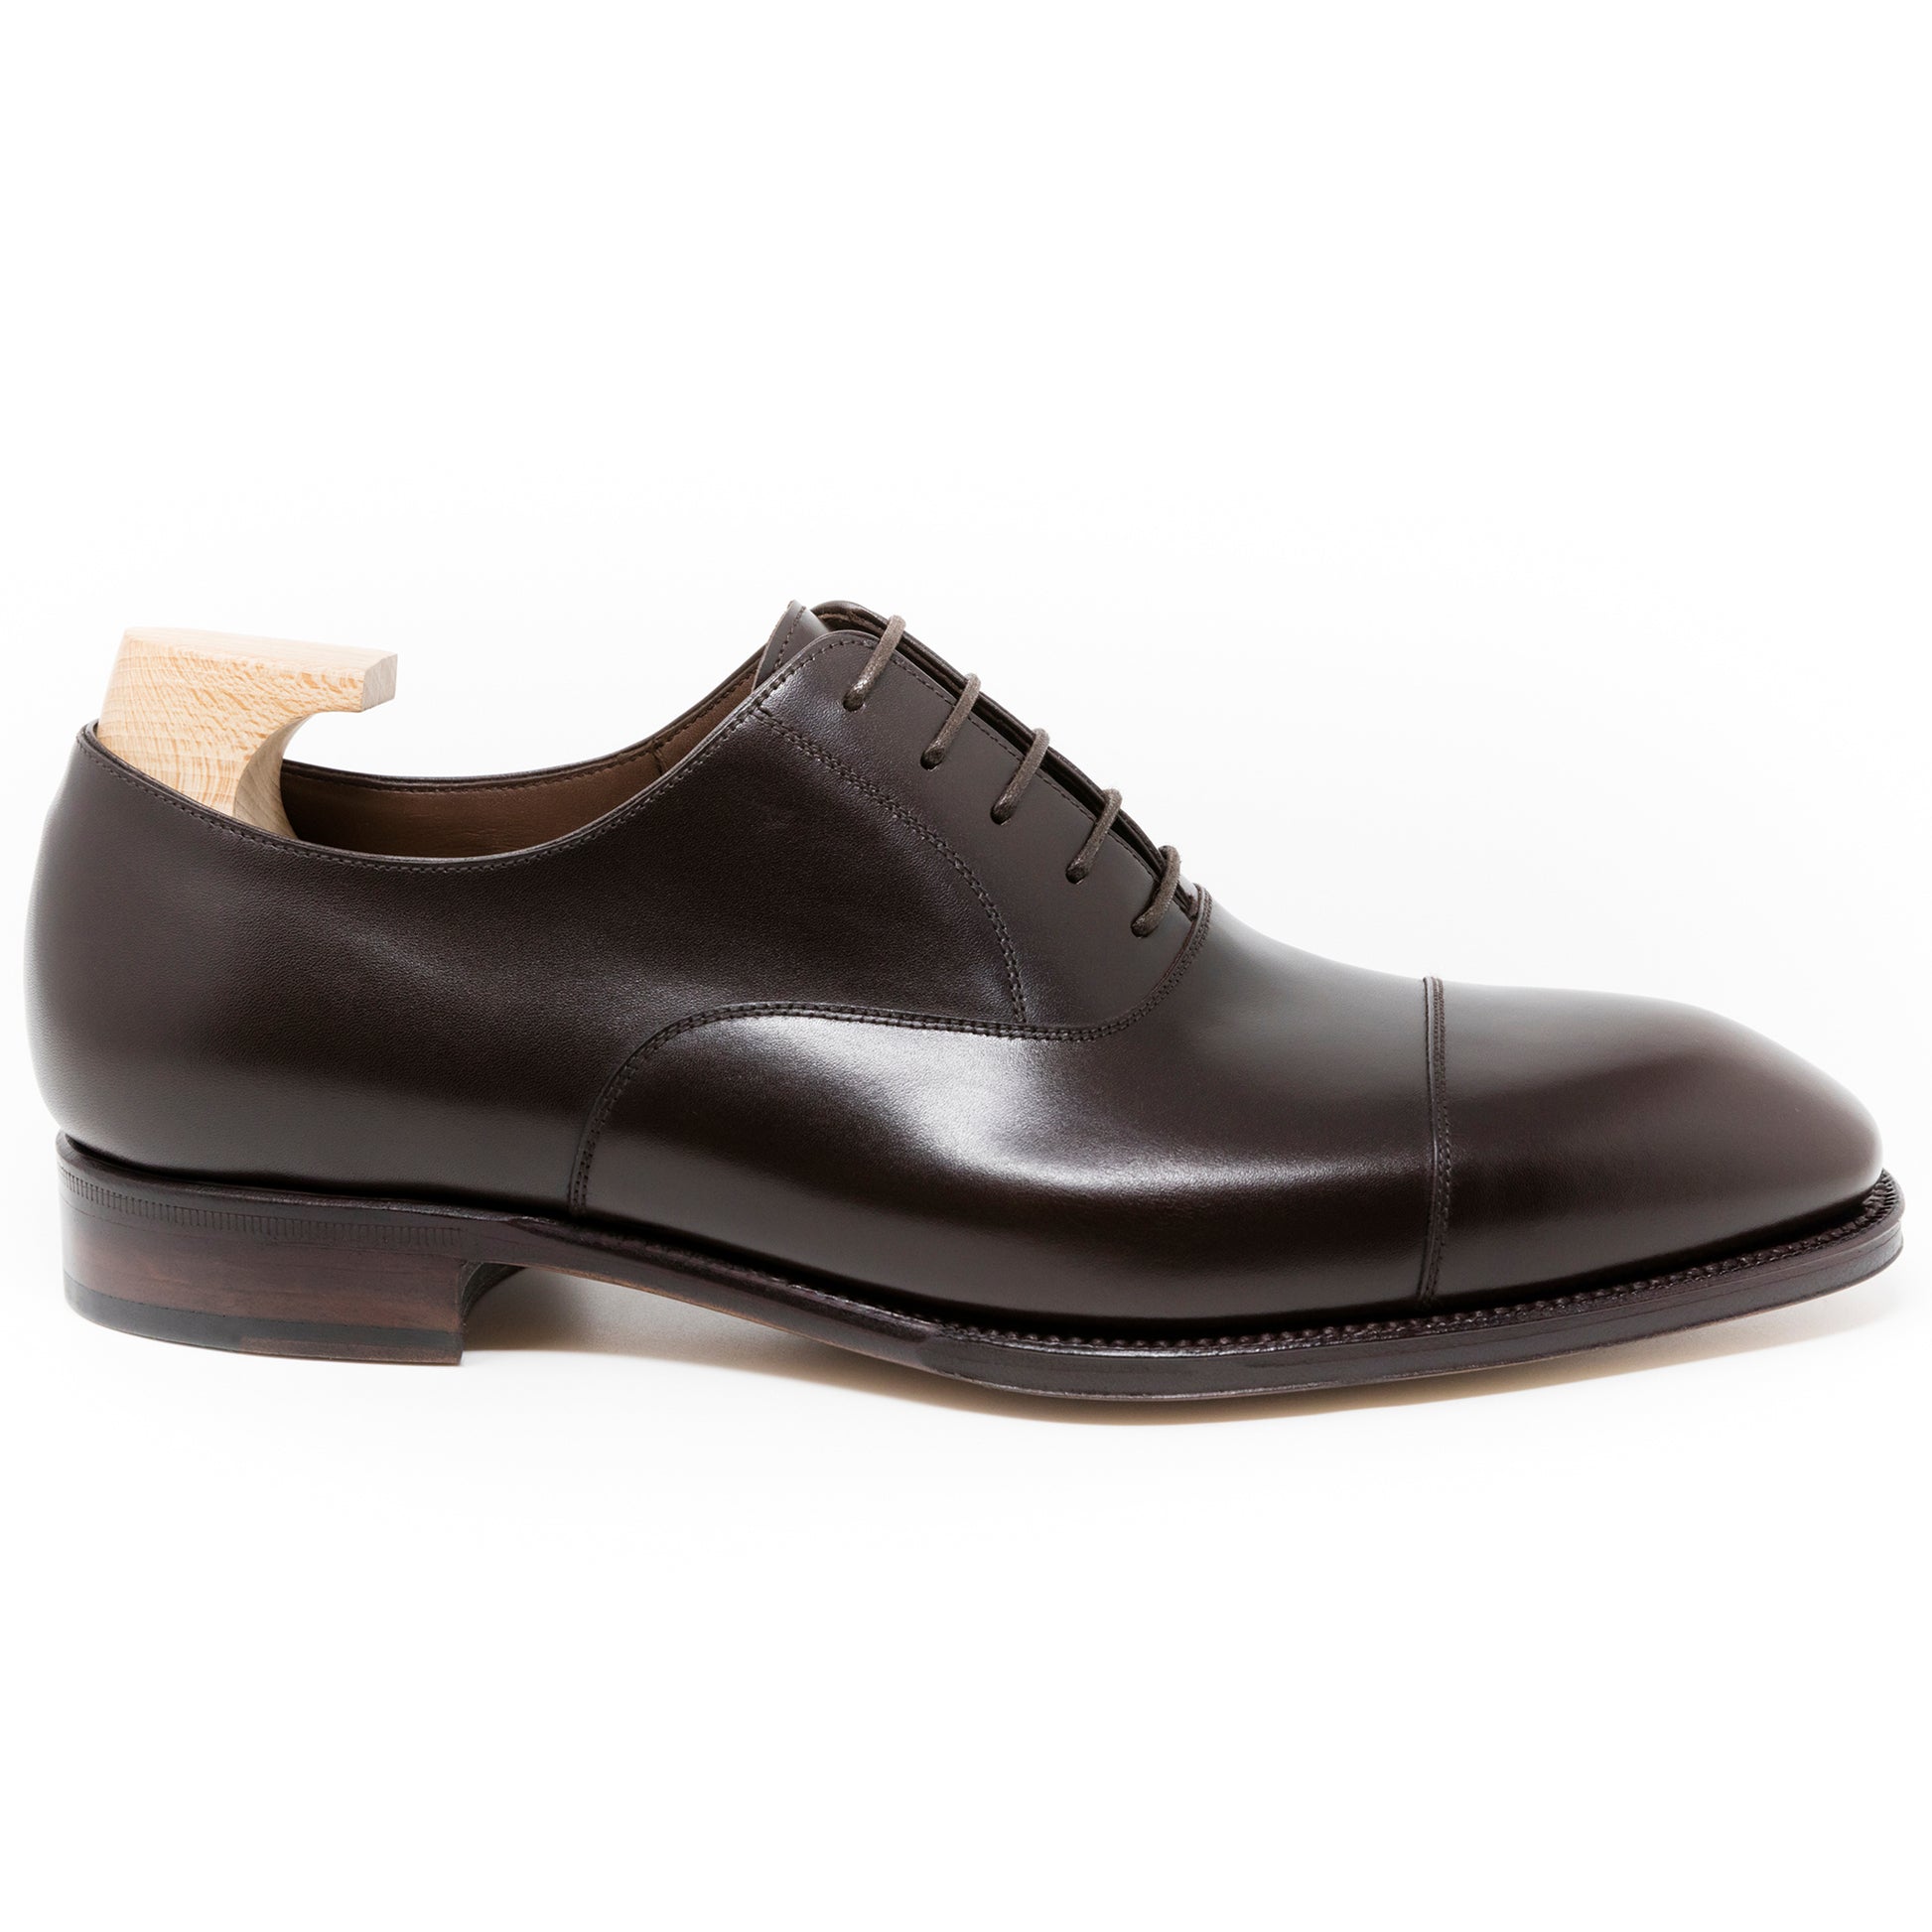 TLB Mallorca leather shoes 502 / ALAN / BOXCALF BROWN